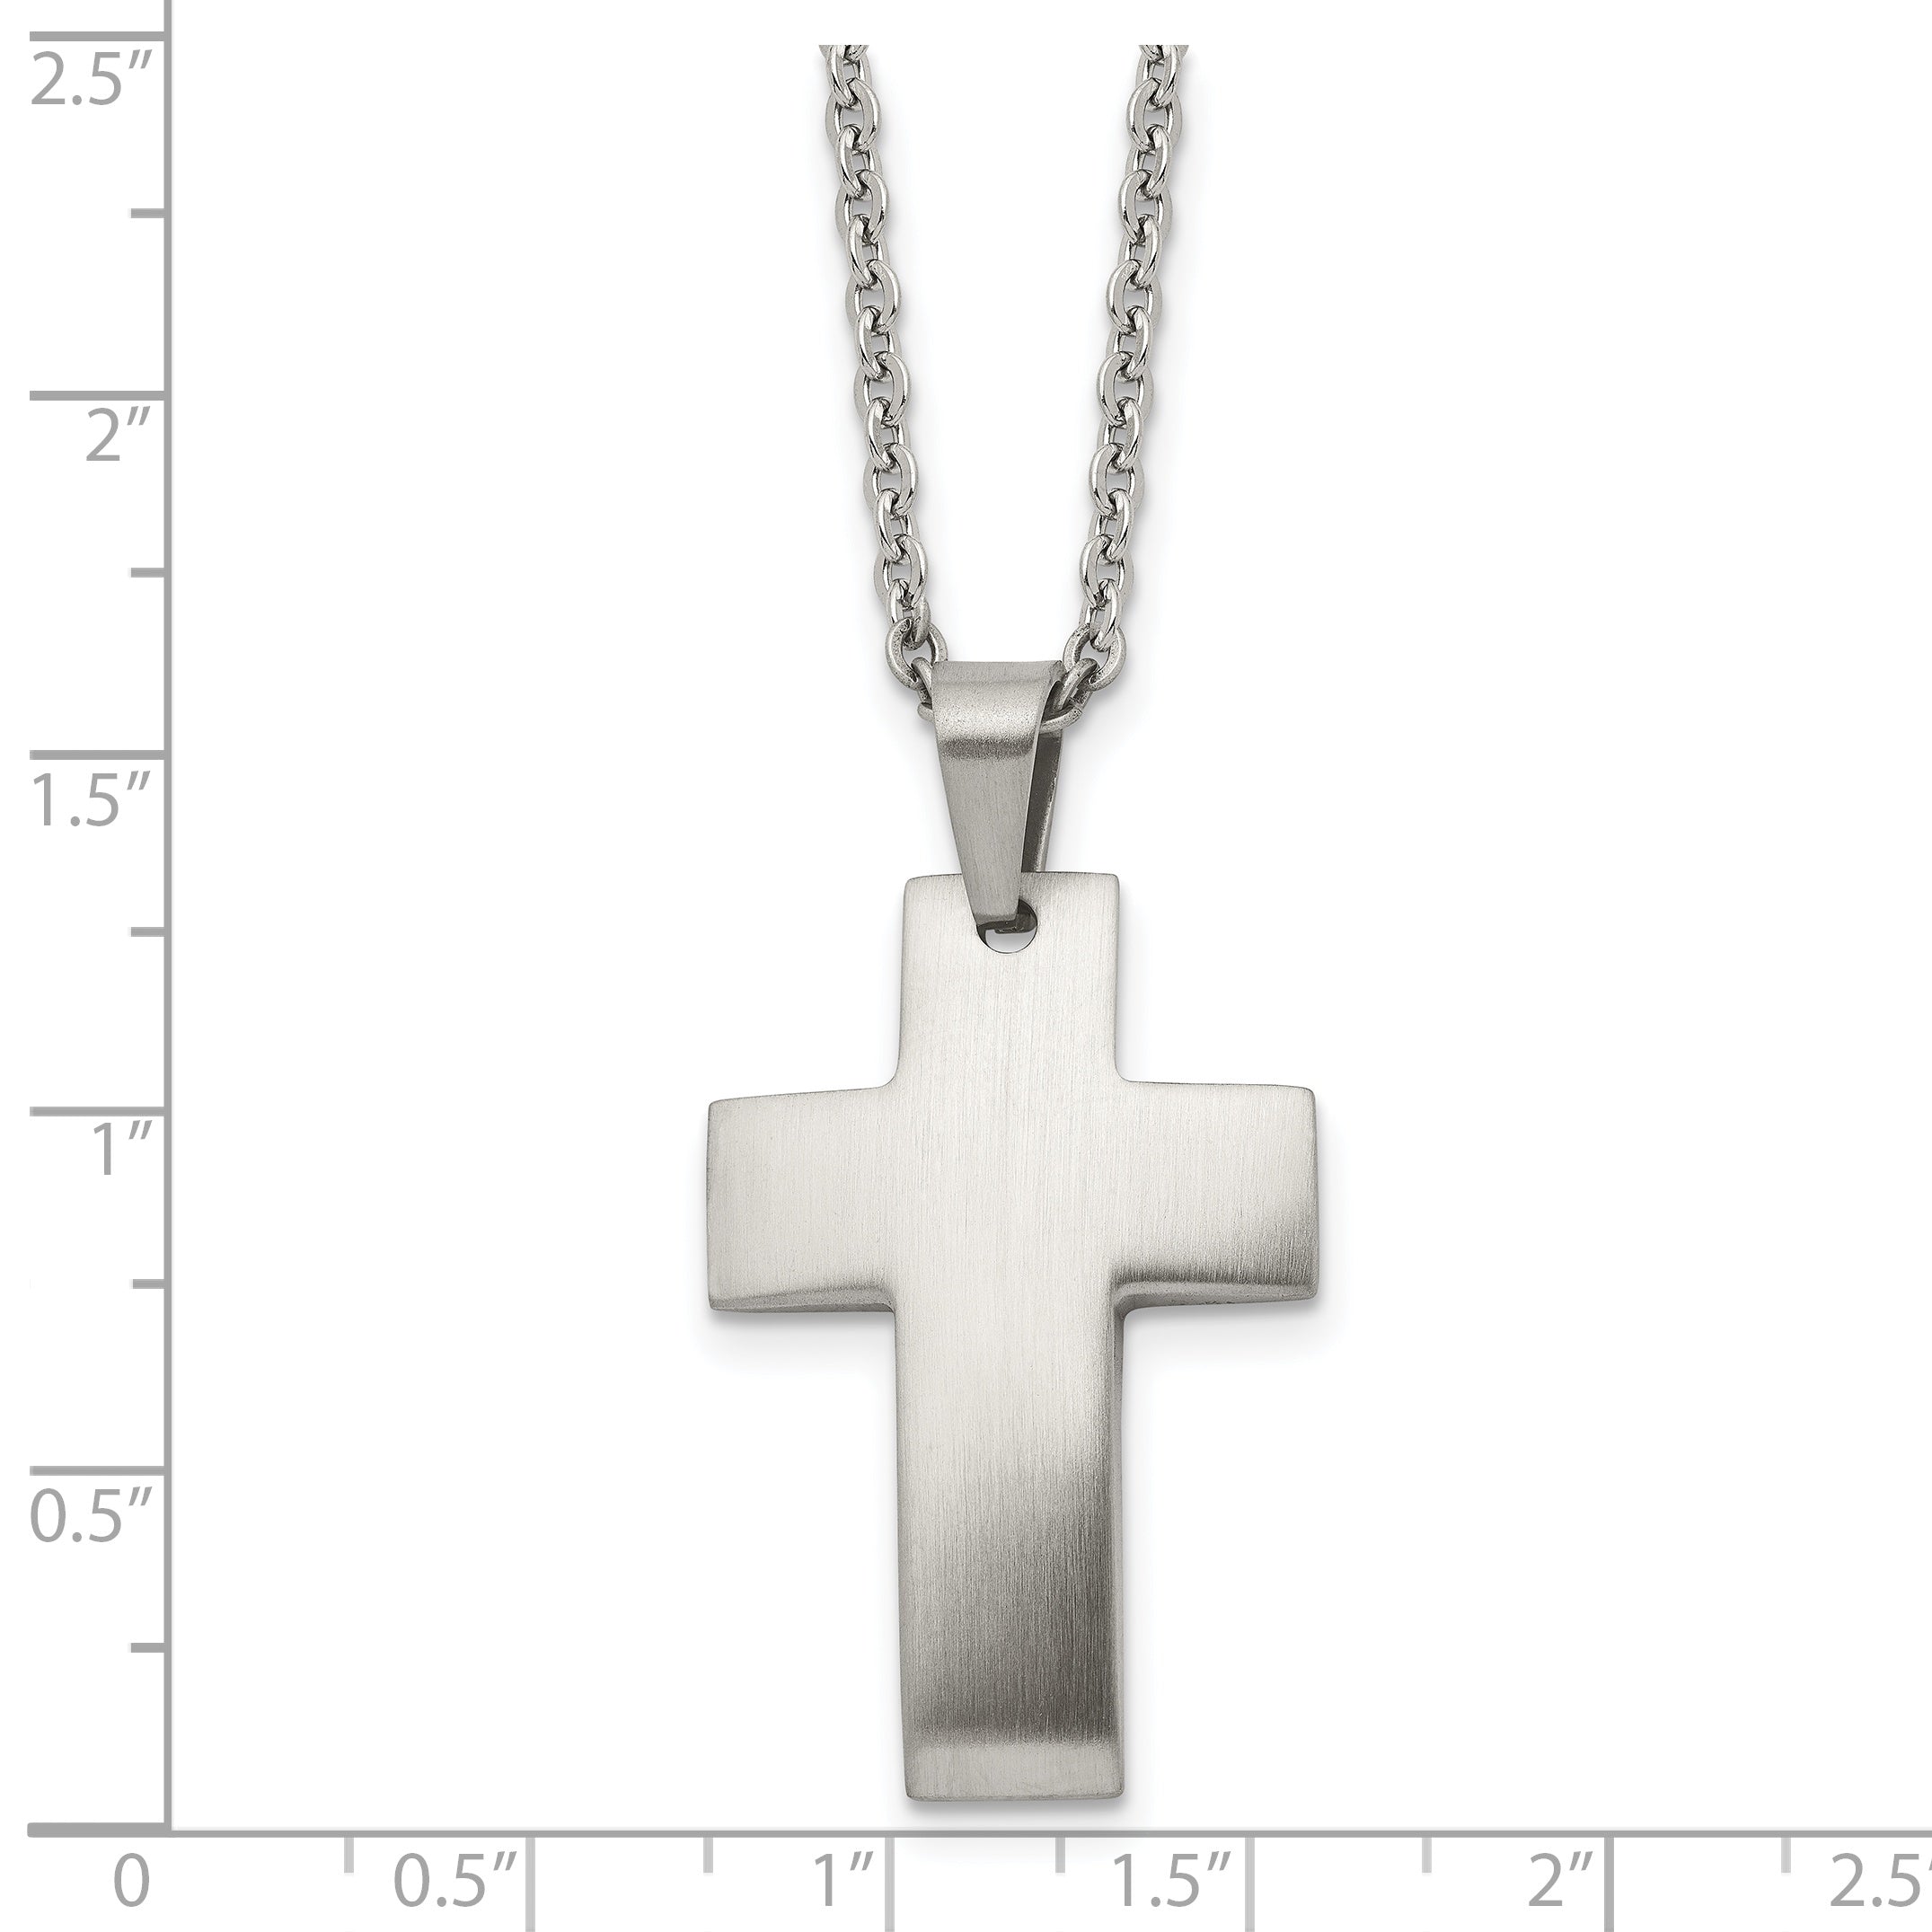 Chisel Stainless Steel Brushed Cross Pendant on a 20 inch Cable Chain Necklace